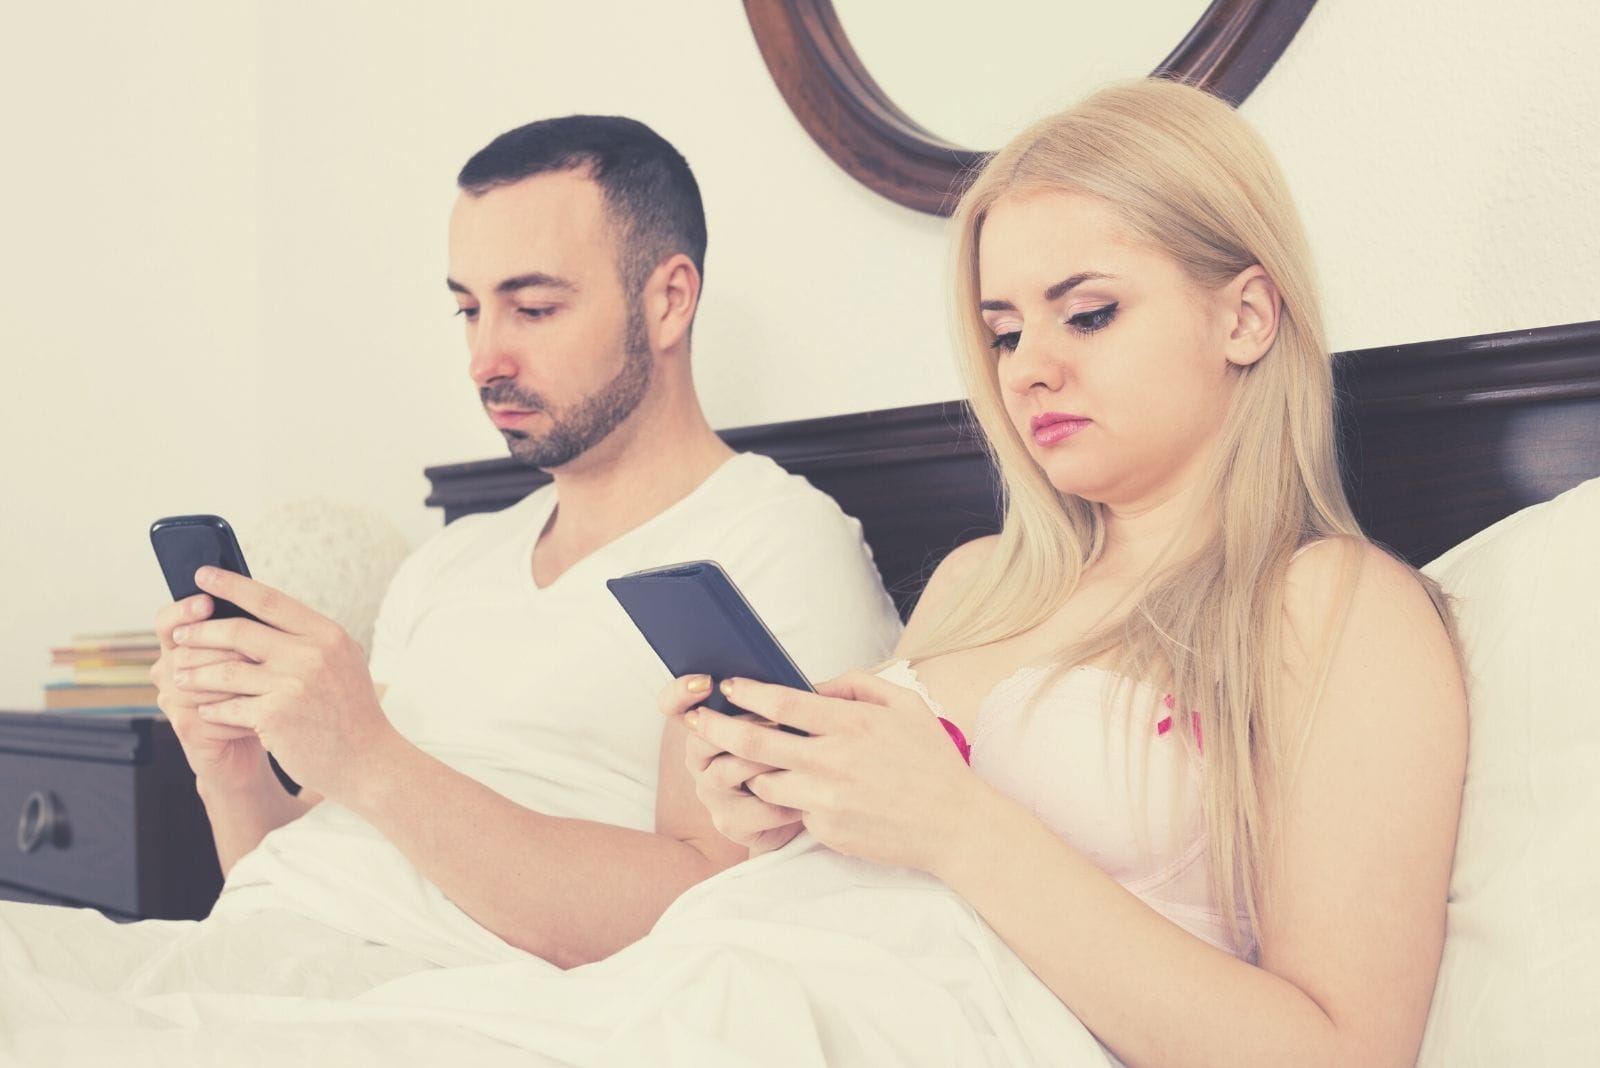 This Is How Phubbing Ruins Your Relationship (It’s Not If, But When)